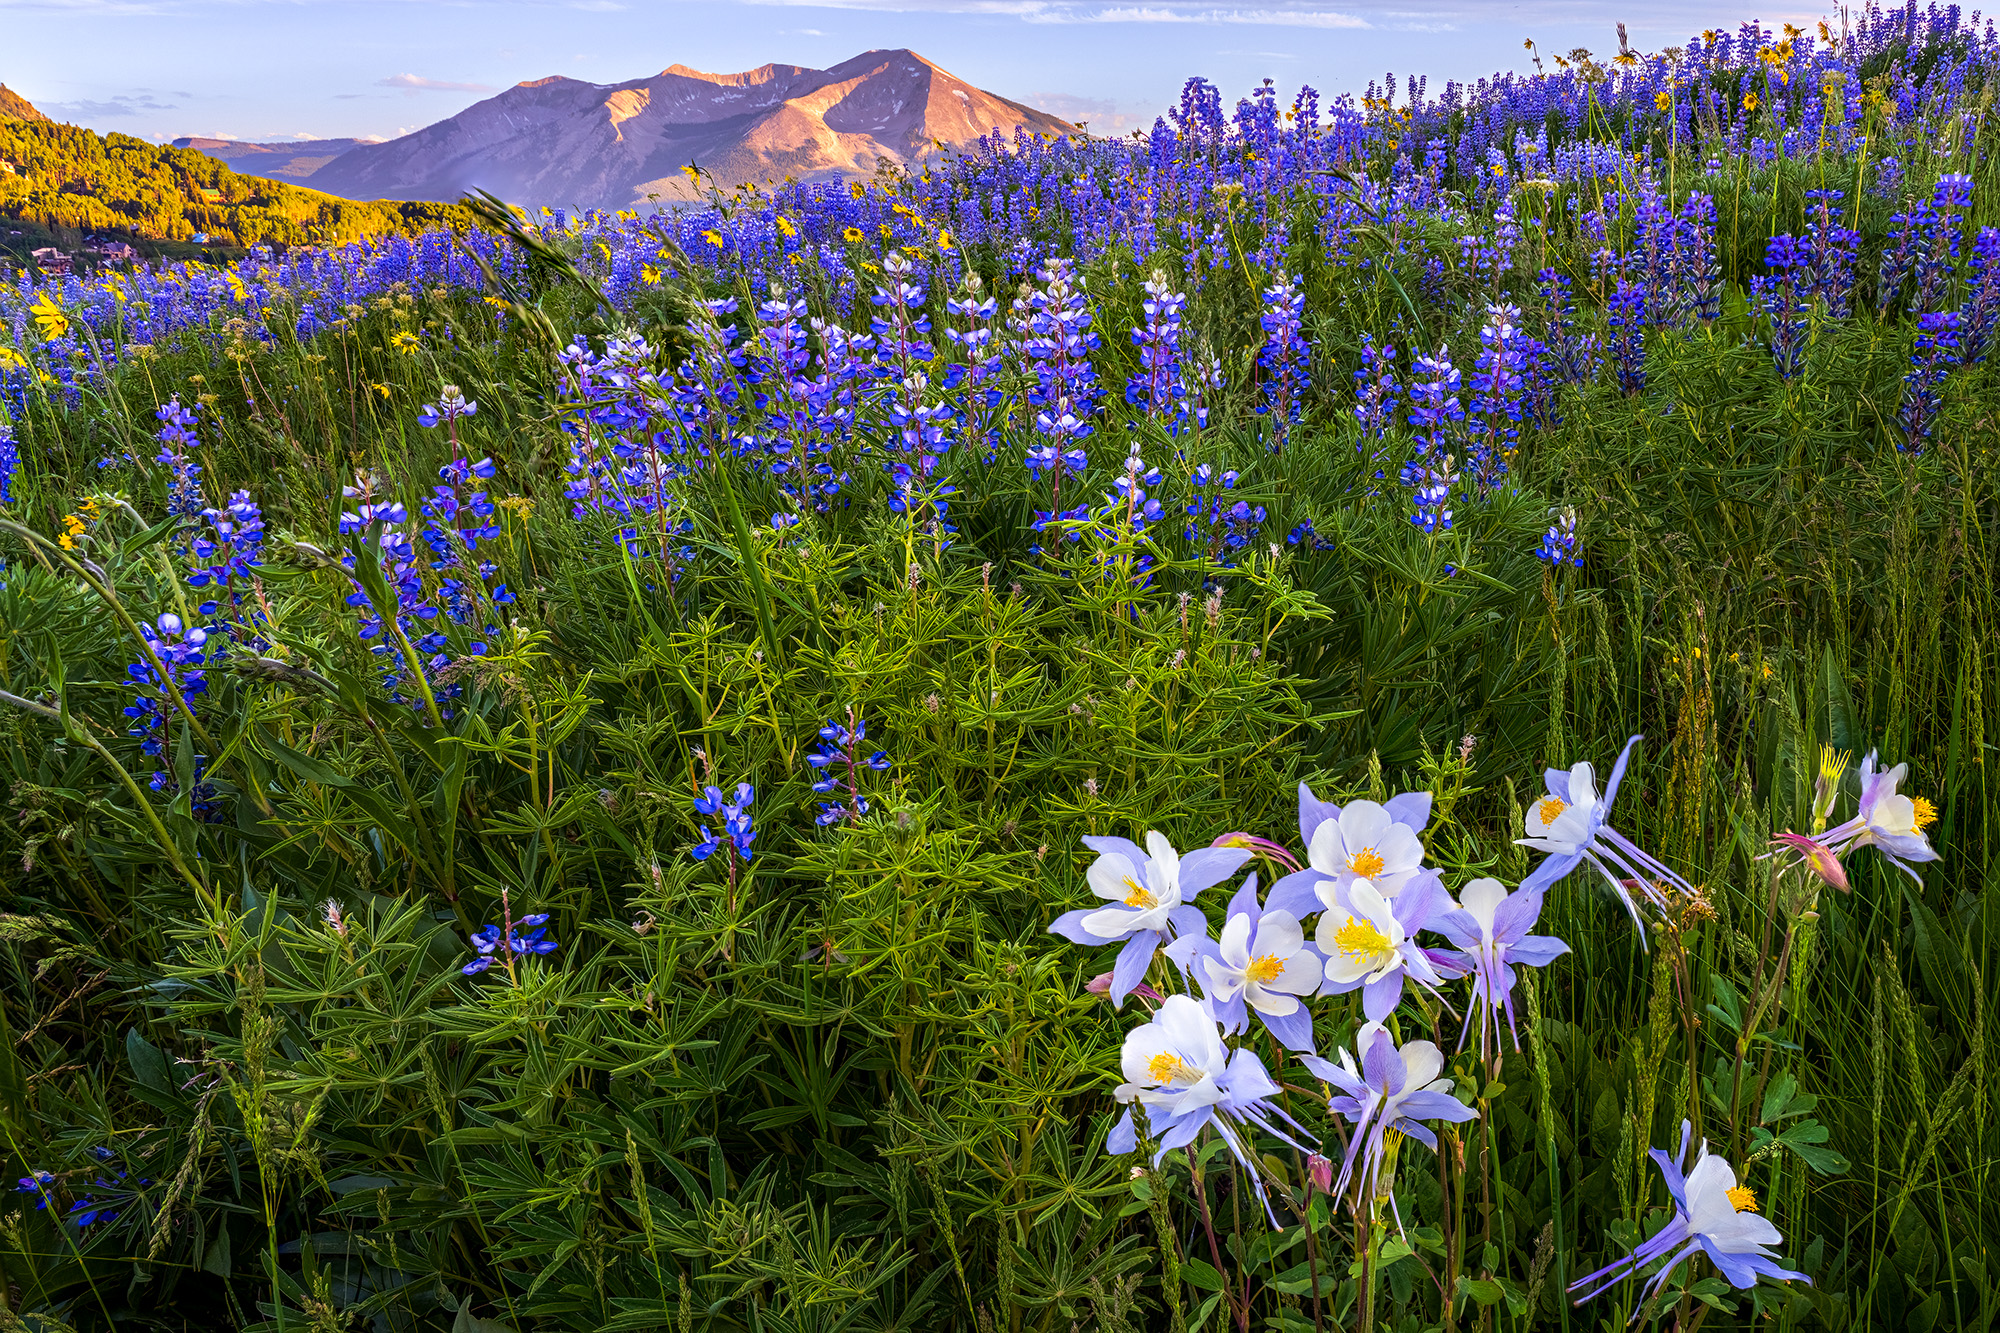 Amidst the rugged beauty of Crested Butte, Colorado, I captured a vibrant testament to nature's artistry. In this image, a profusion...